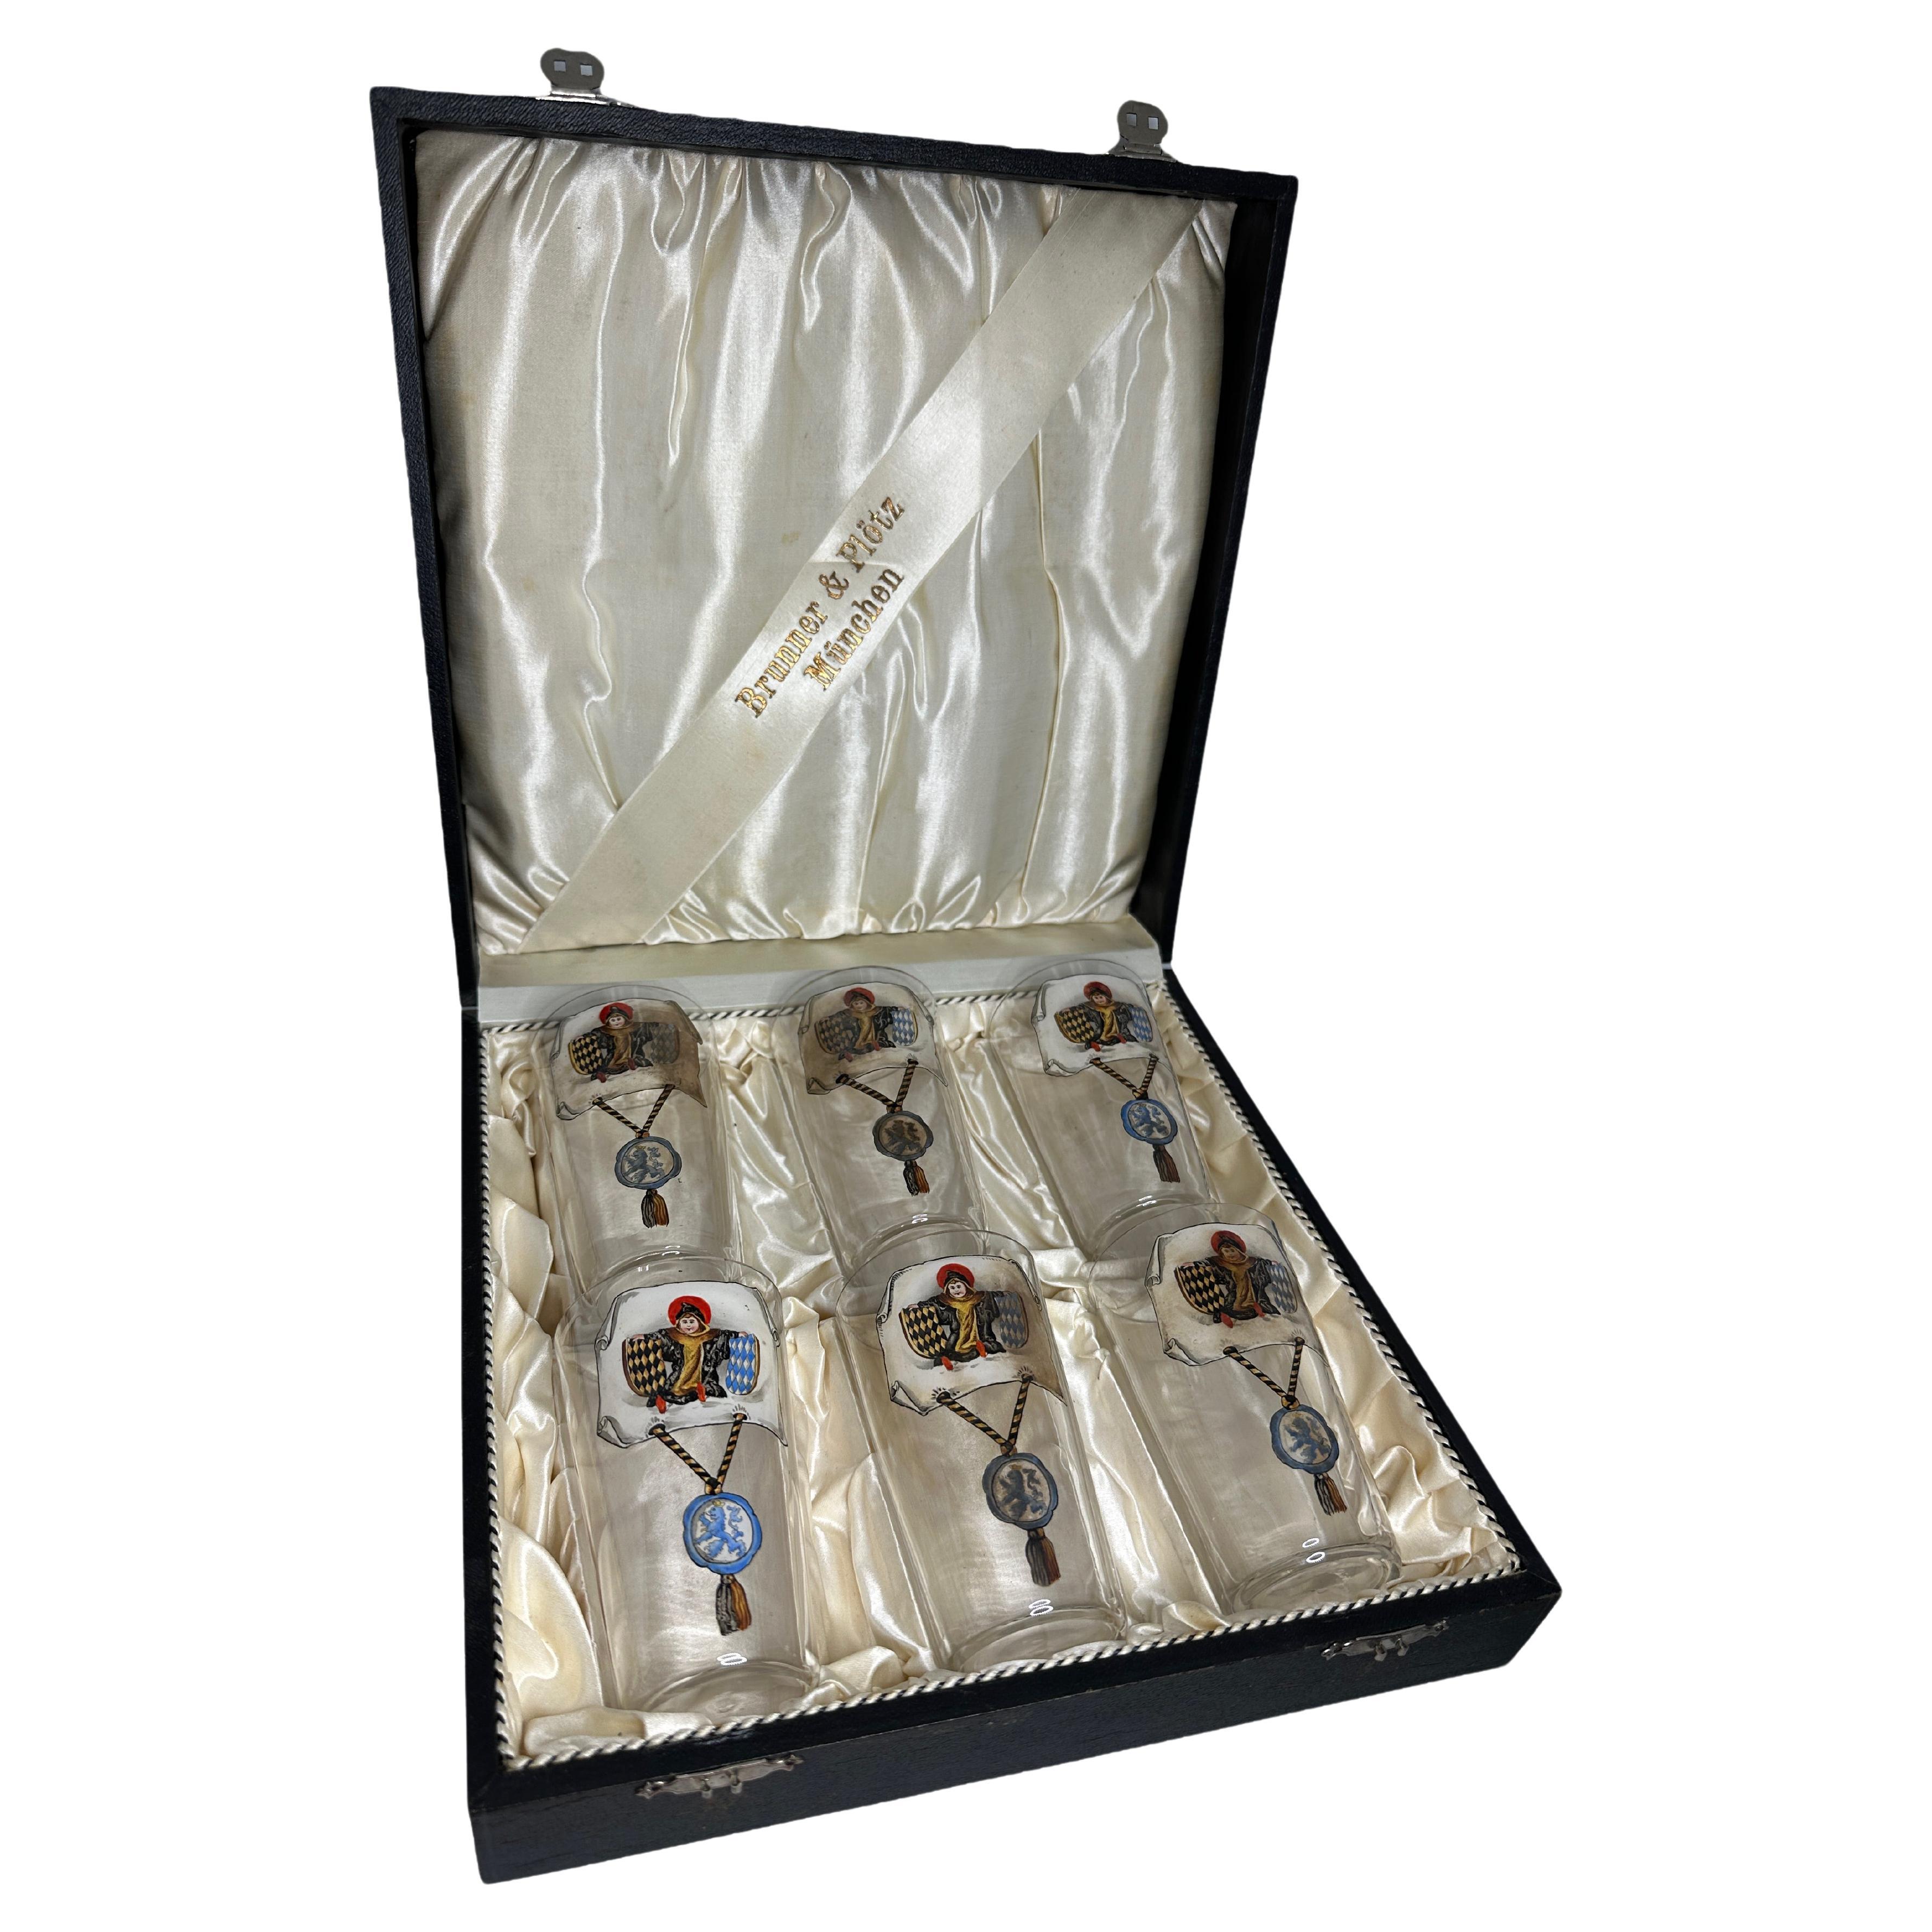 A gorgeous set of six glasses in the original case box - hand painted enamel paint Munich Child pictures on each glass. Set has been made in Germany circa 1910s or older, by Brunner & Plötz in Munich, Germany. Absolutely gorgeous piece hand painted